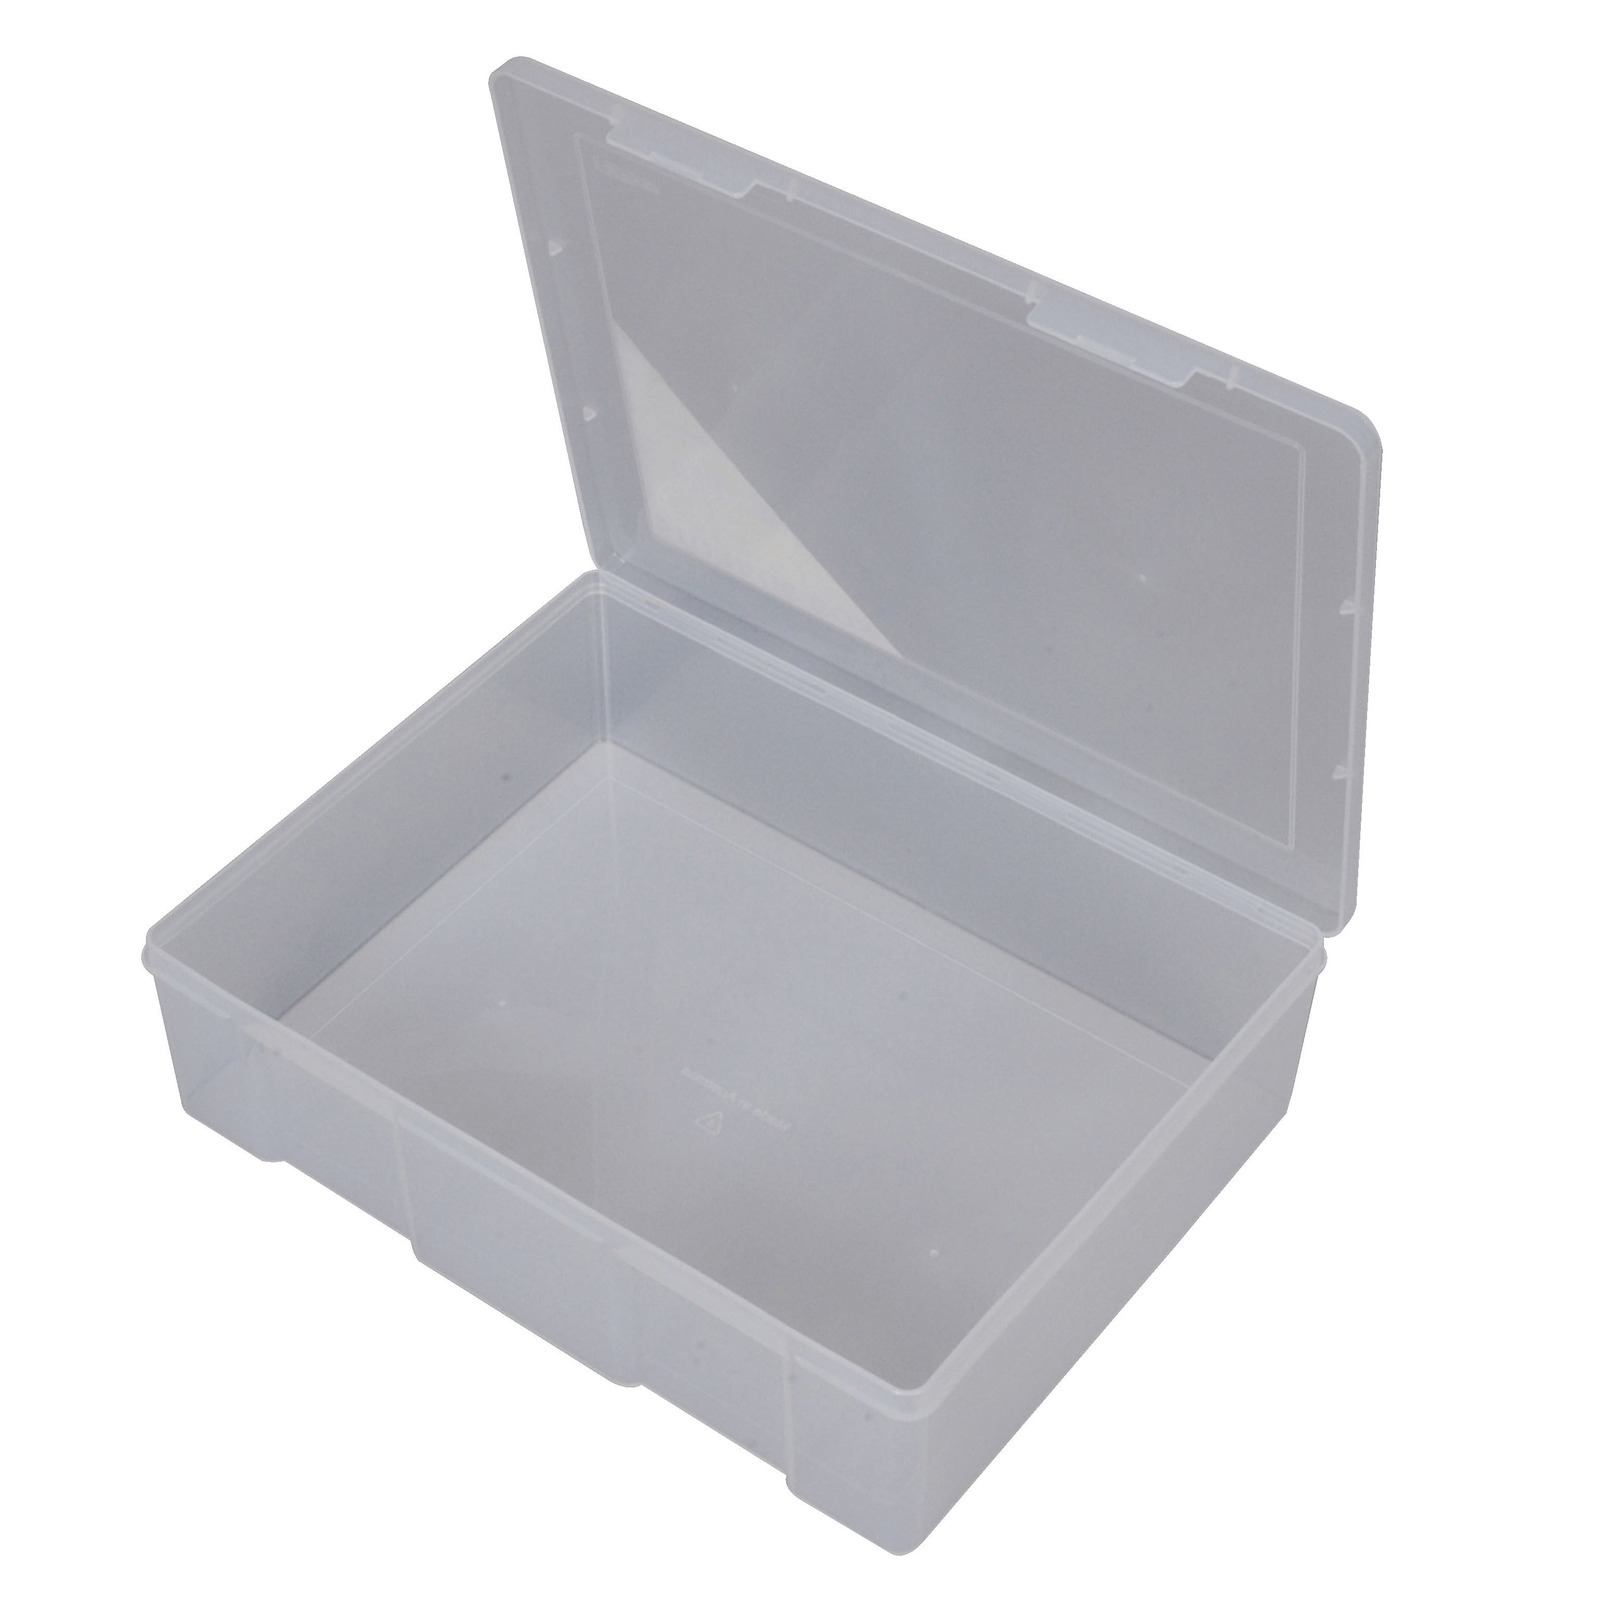 Accessory Boxes - Extra Large Extra Deep (1 compartment)